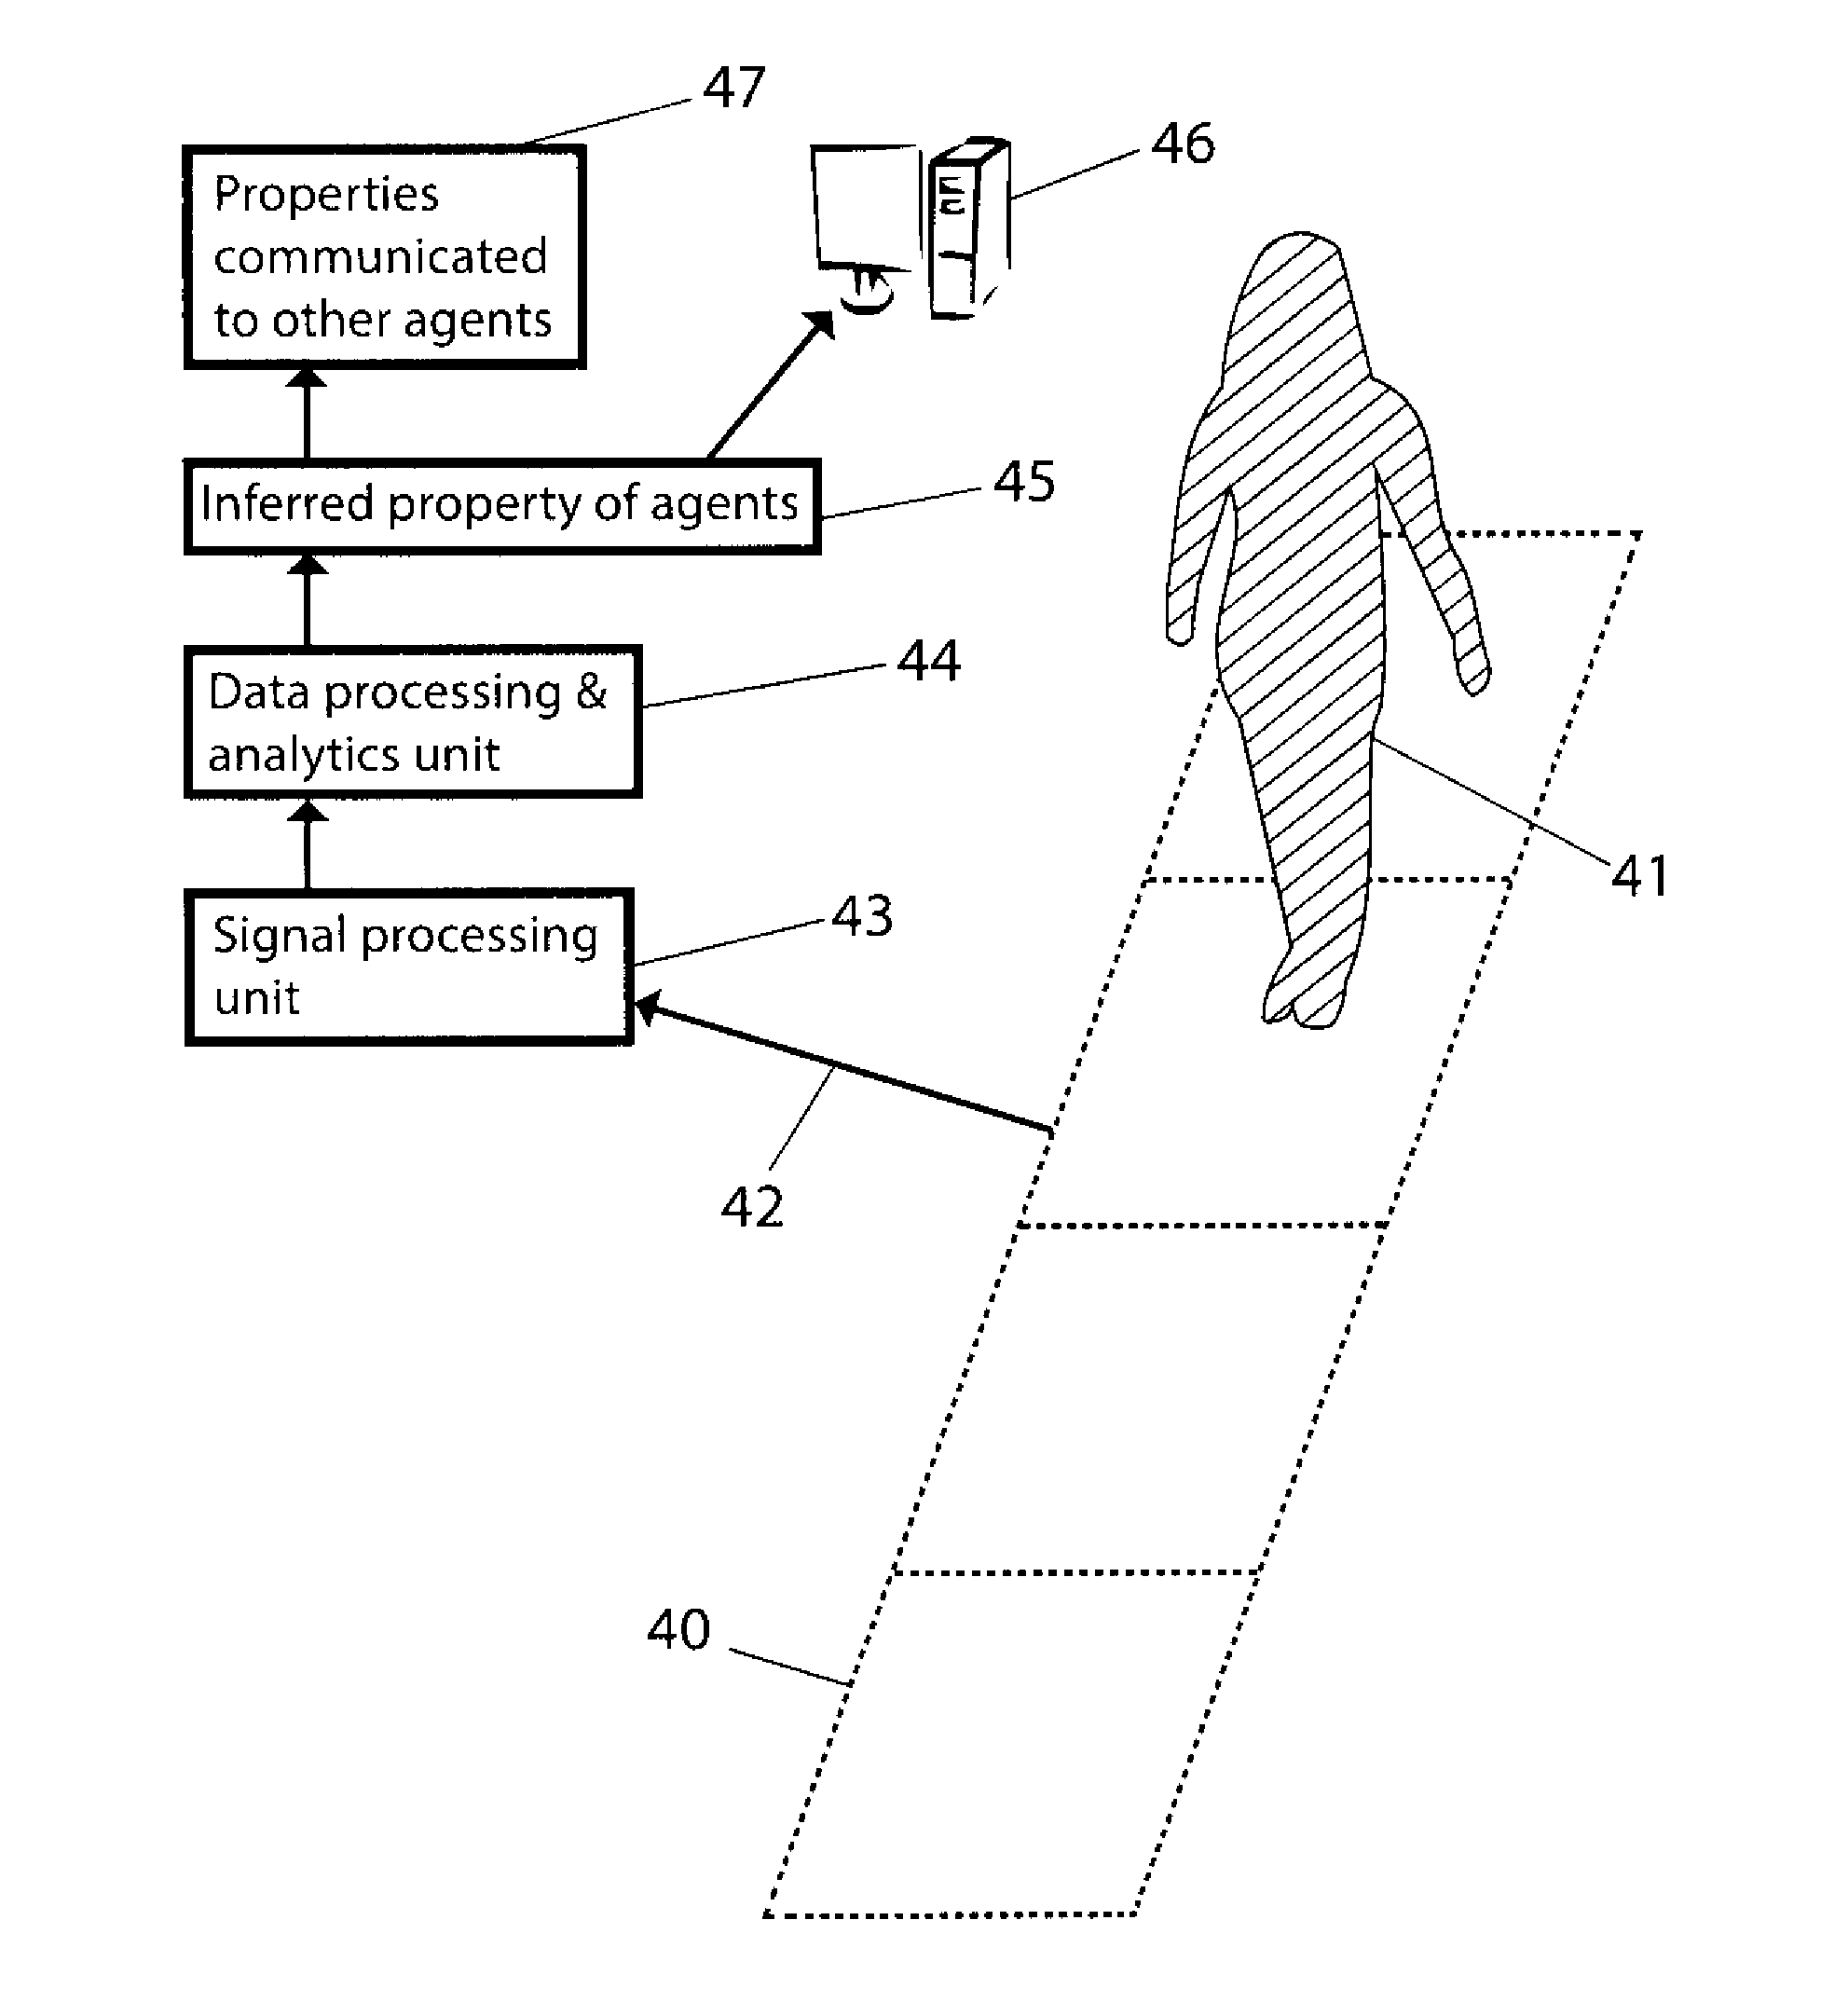 Method and Apparatus to Infer Object and Agent Properties, Activity Capacities, Behaviors, and Intents from Contact and Pressure Images